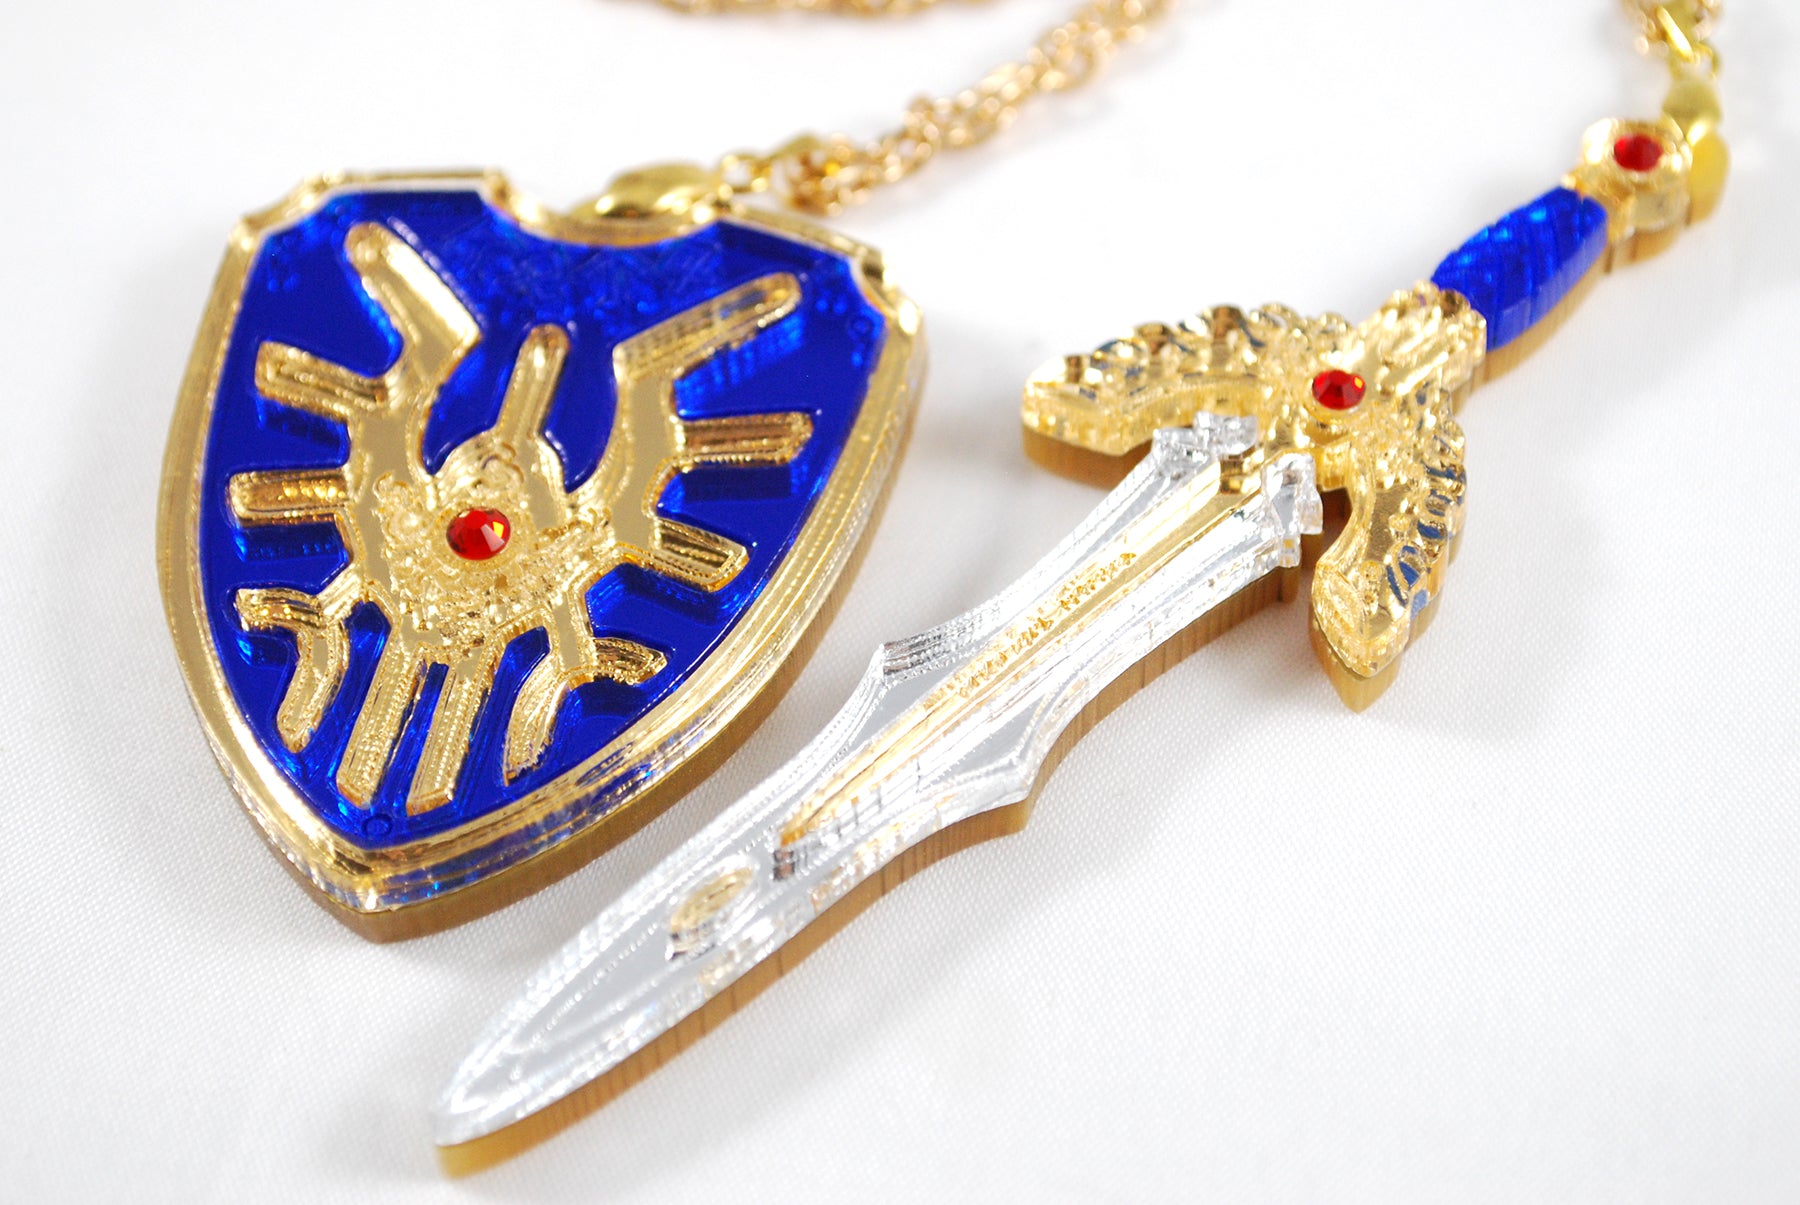 dragon-quest-erdrick-s-sword-and-shield-acrylic-necklace-or-keychain-clinkorz